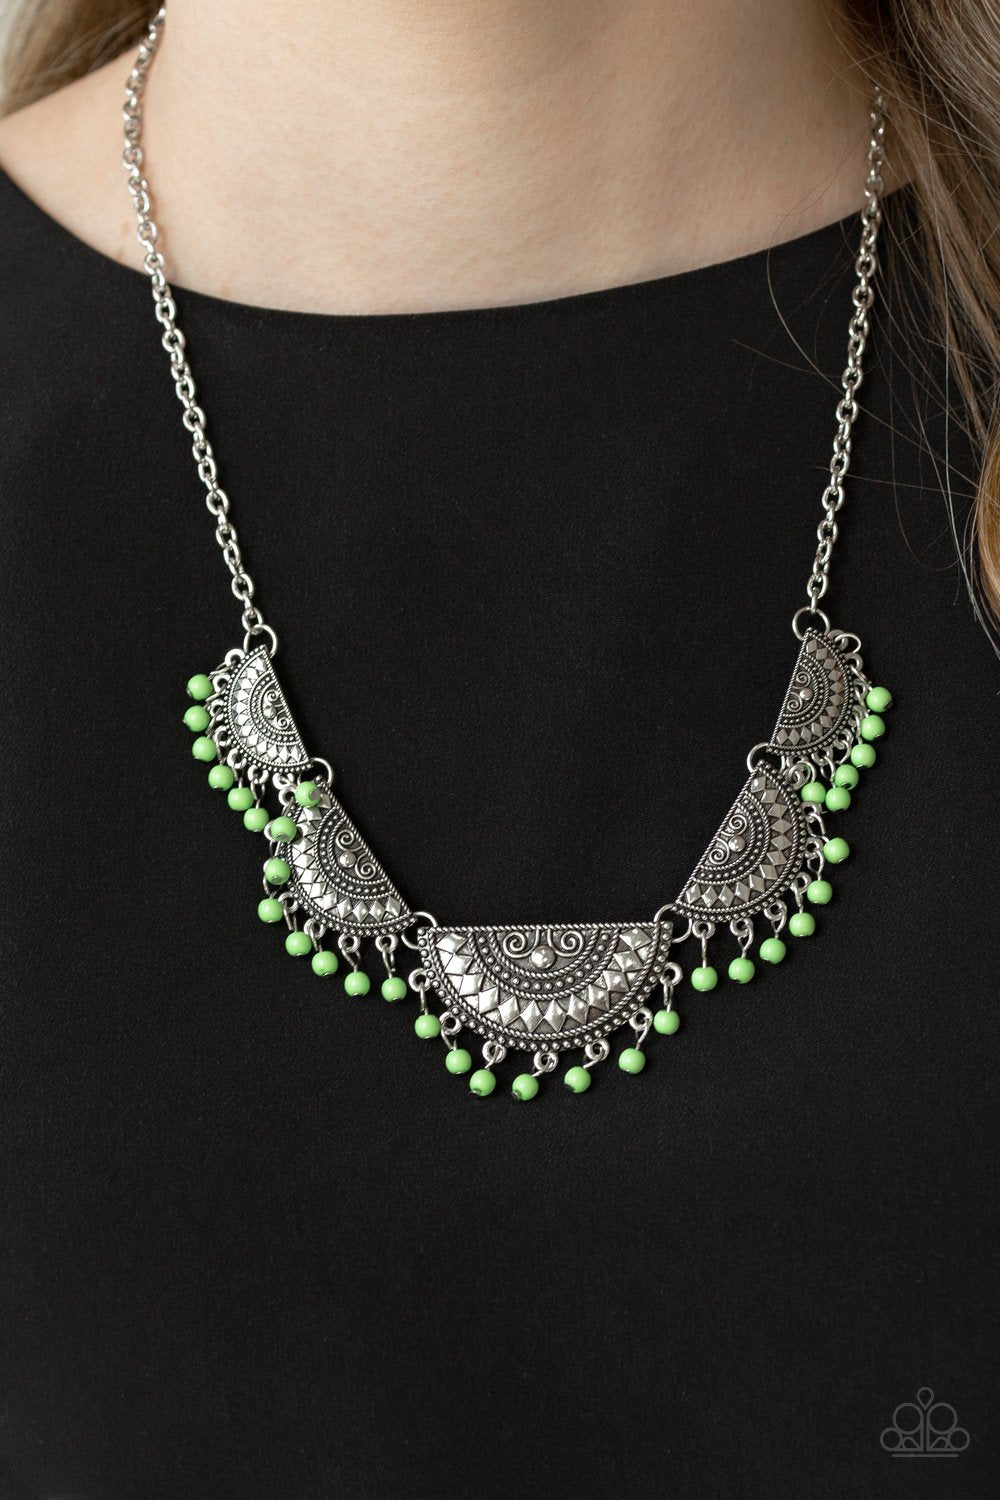 Paparazzi Accessories - Boho Baby - Green Necklace